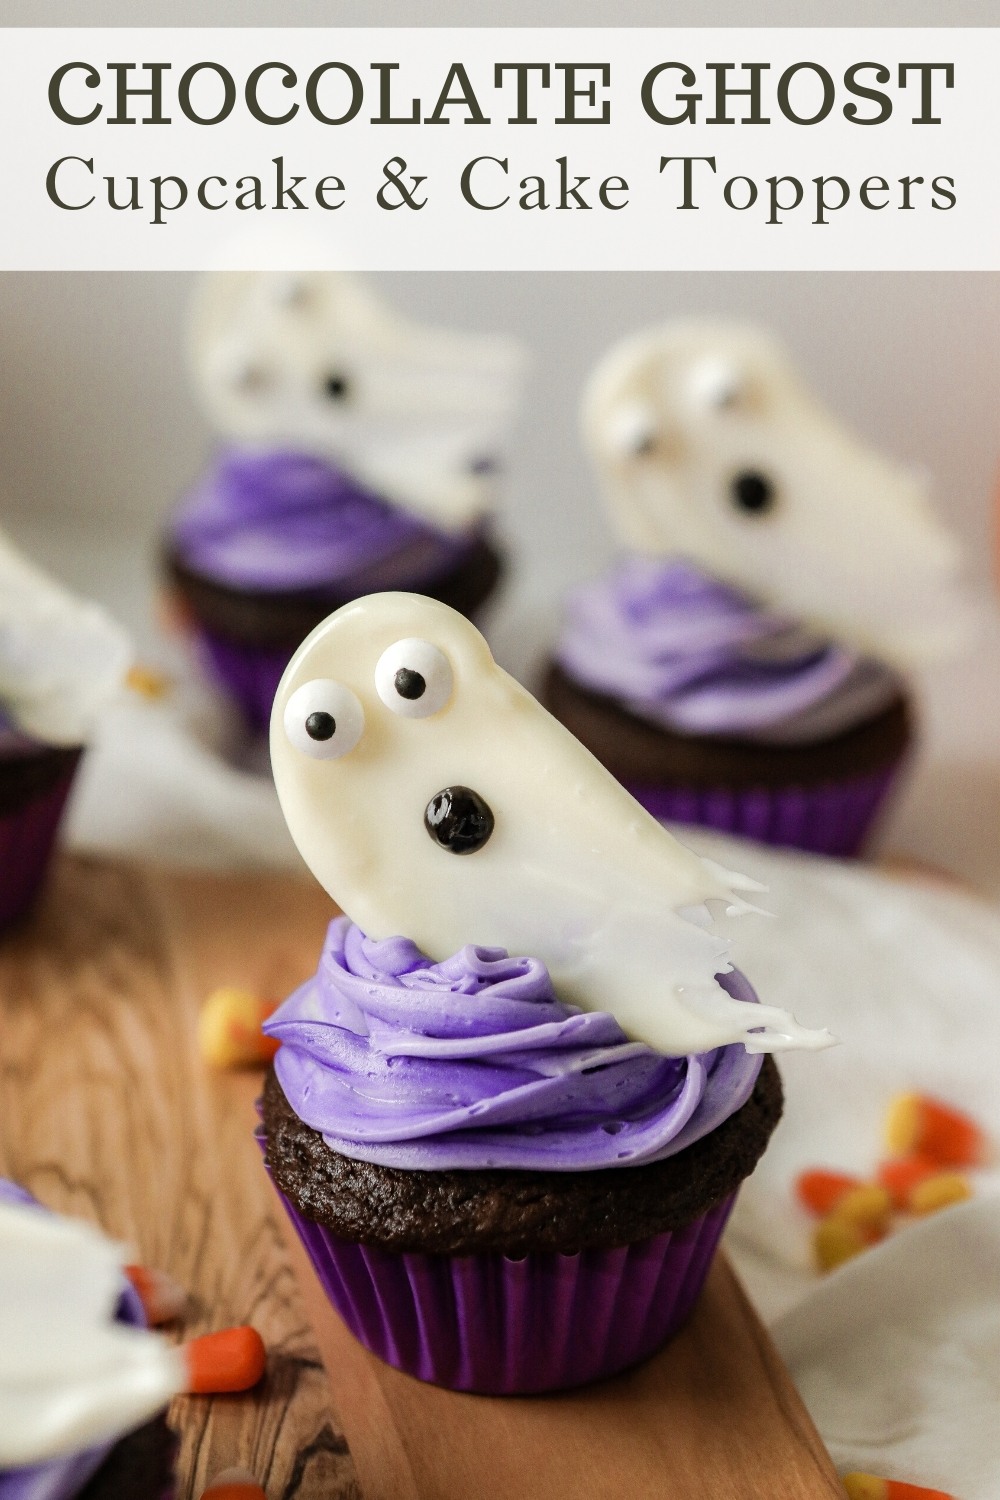 Chocolate Ghost Cupcake and Cake Toppers